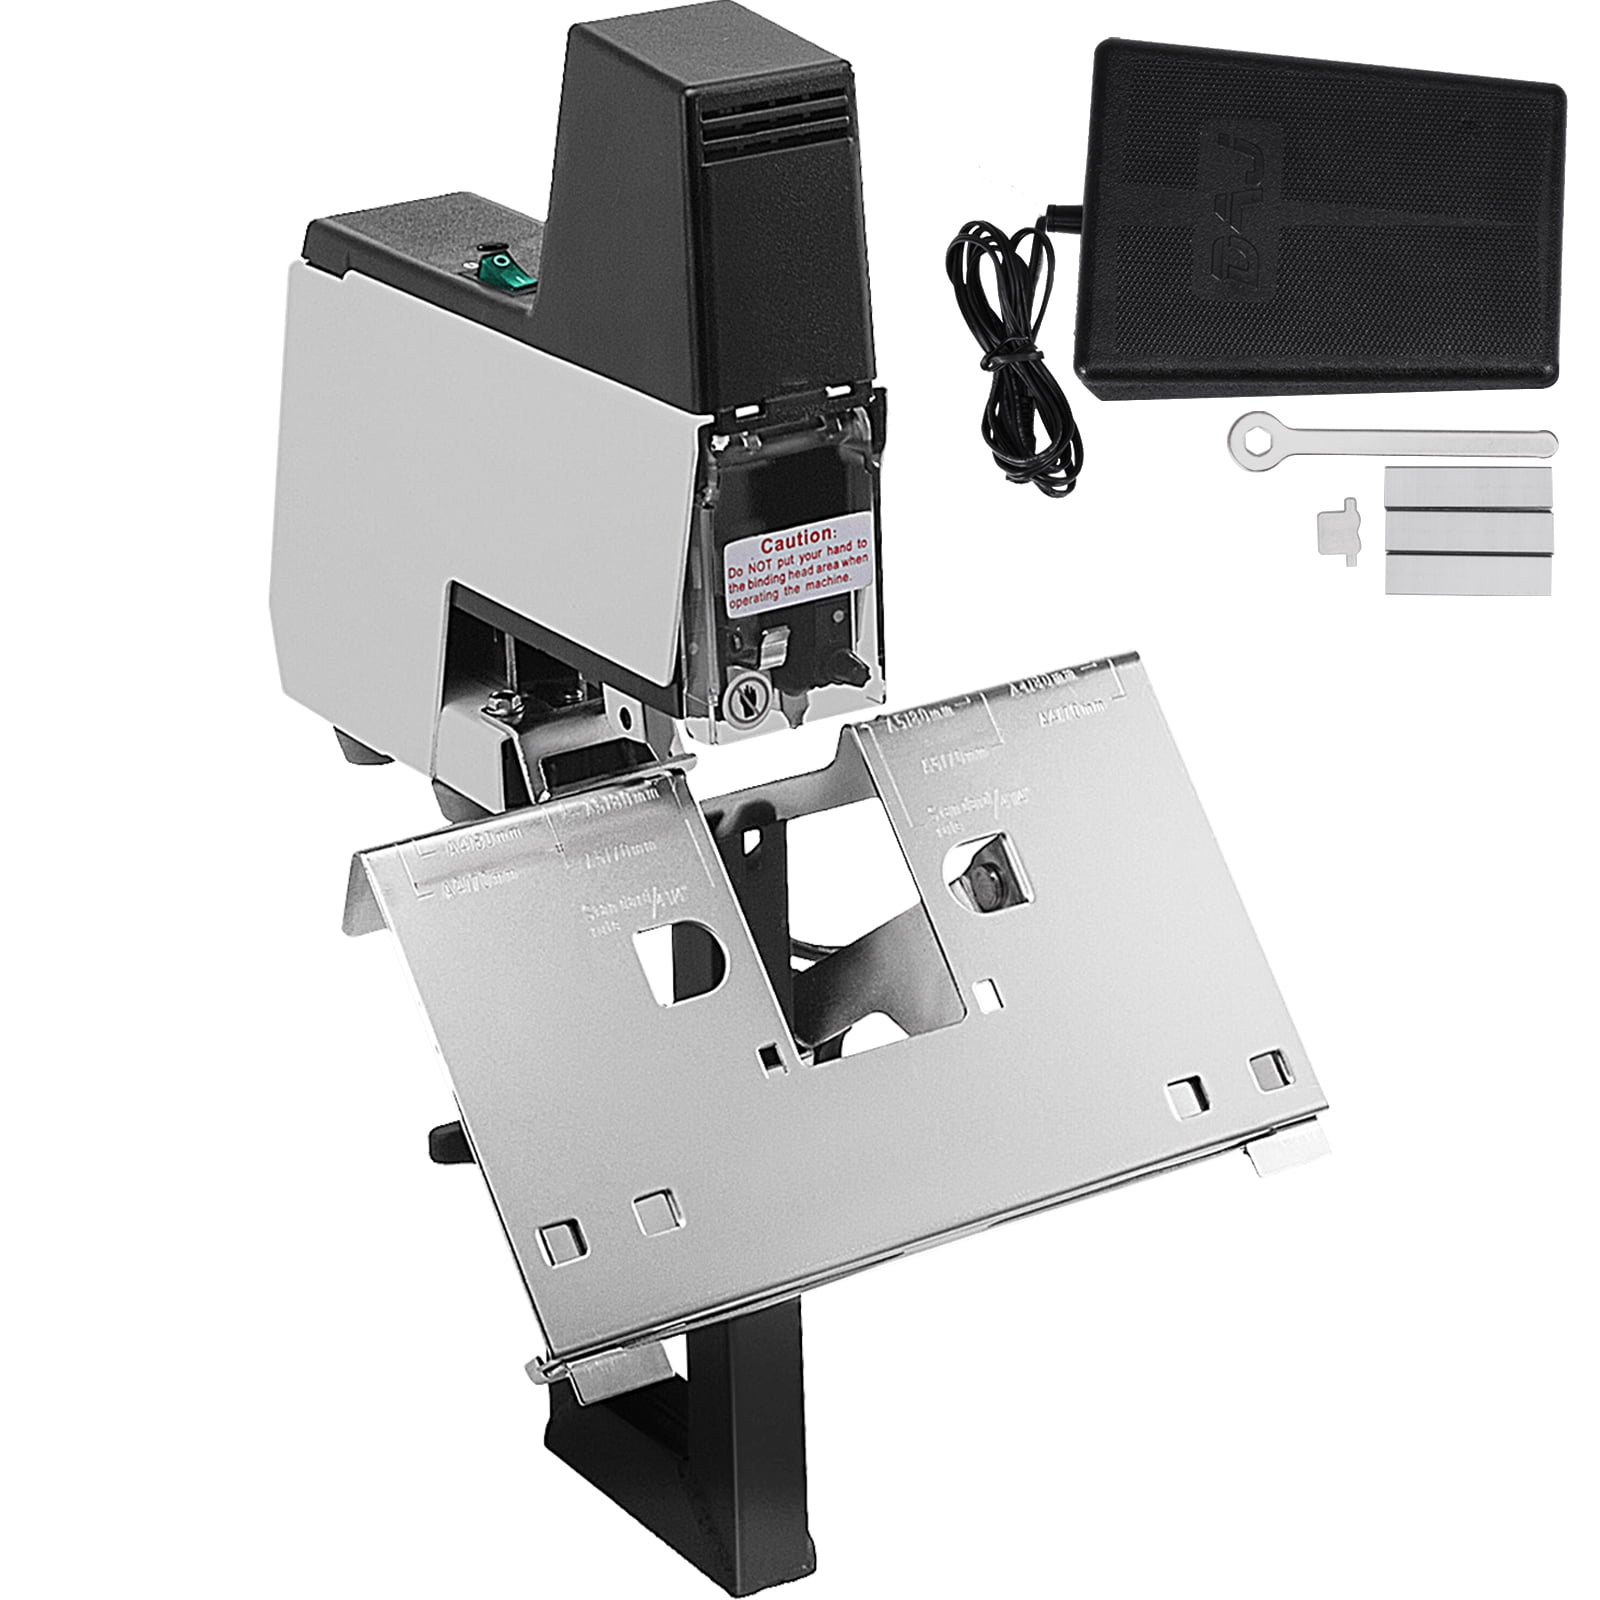 Thermal Binding Machine NZ Supplier Order Online 24/7 Fast Delivery.